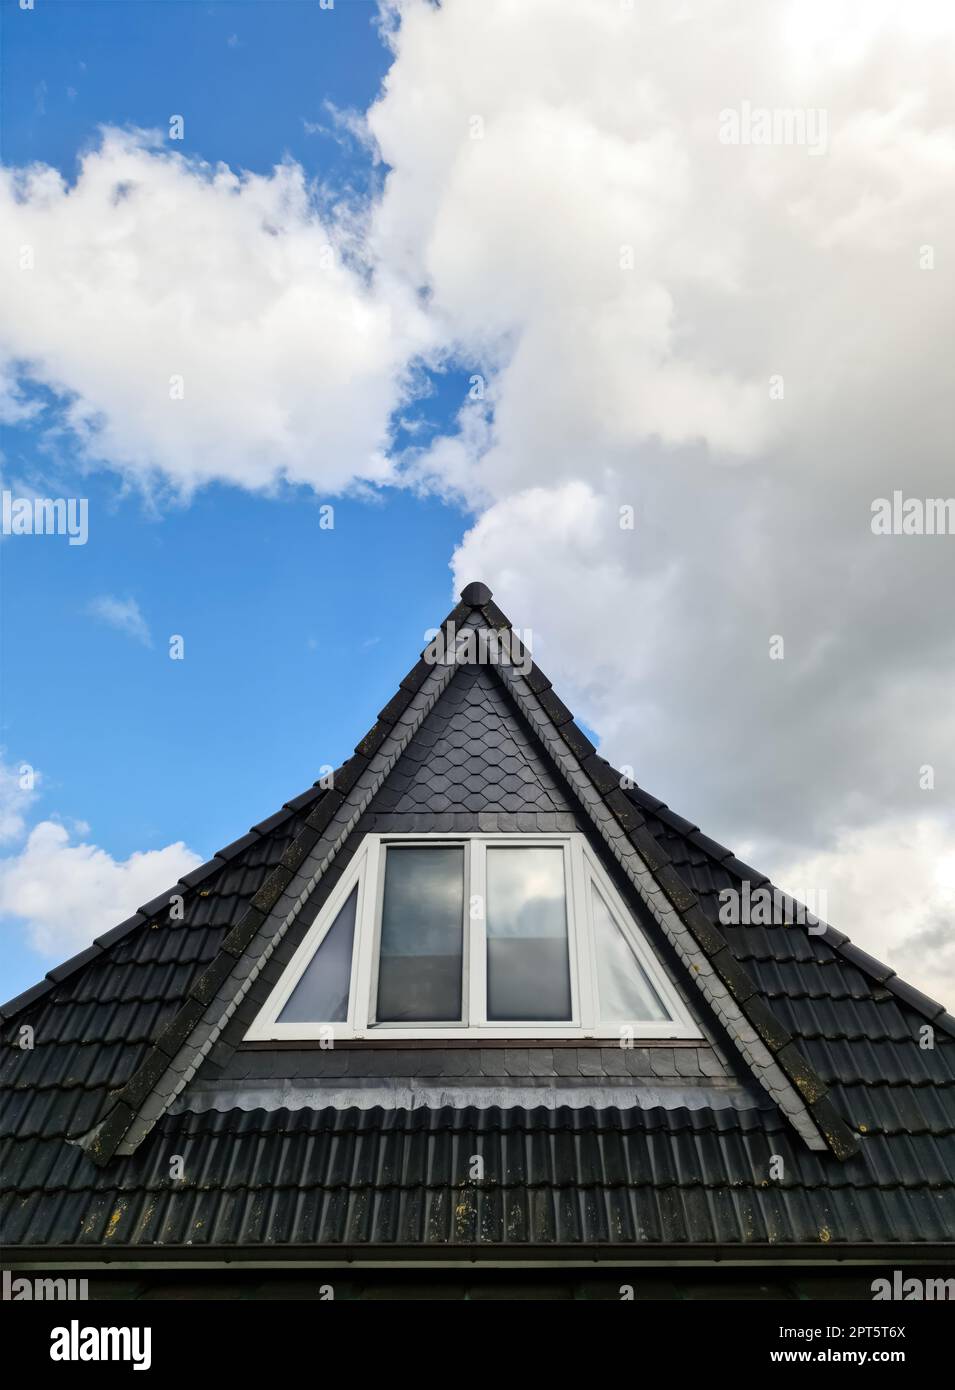 Open roof window in velux style with black roof tiles Stock Photo